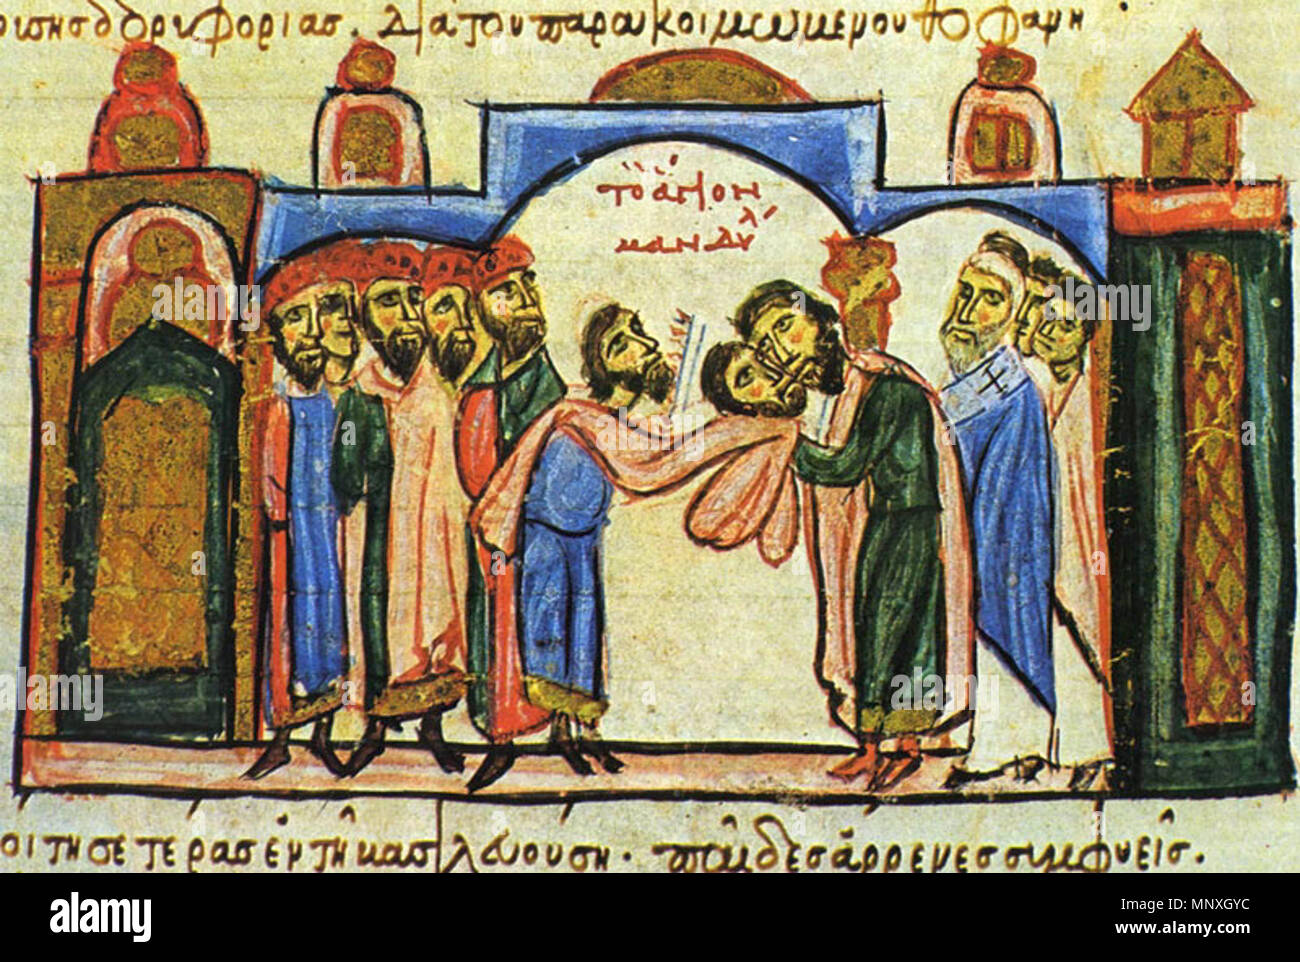 . English: The surrender of the Holy Mandylion (the 'Image of Edessa'), bearing the face of Christ, by the inhabitants of Edessa in Mesopotamia to the Byzantines in 944. Ελληνικά: Η παράδοση του Ιερού Μανδυλίου από τους κατοίκους της Εδέσσης της Μεσοποταμίας στους Βυζαντινούς, το 944. 13th century. unknown 13th century author 1151 Surrender of the Mandylion to the Byzantines Stock Photo